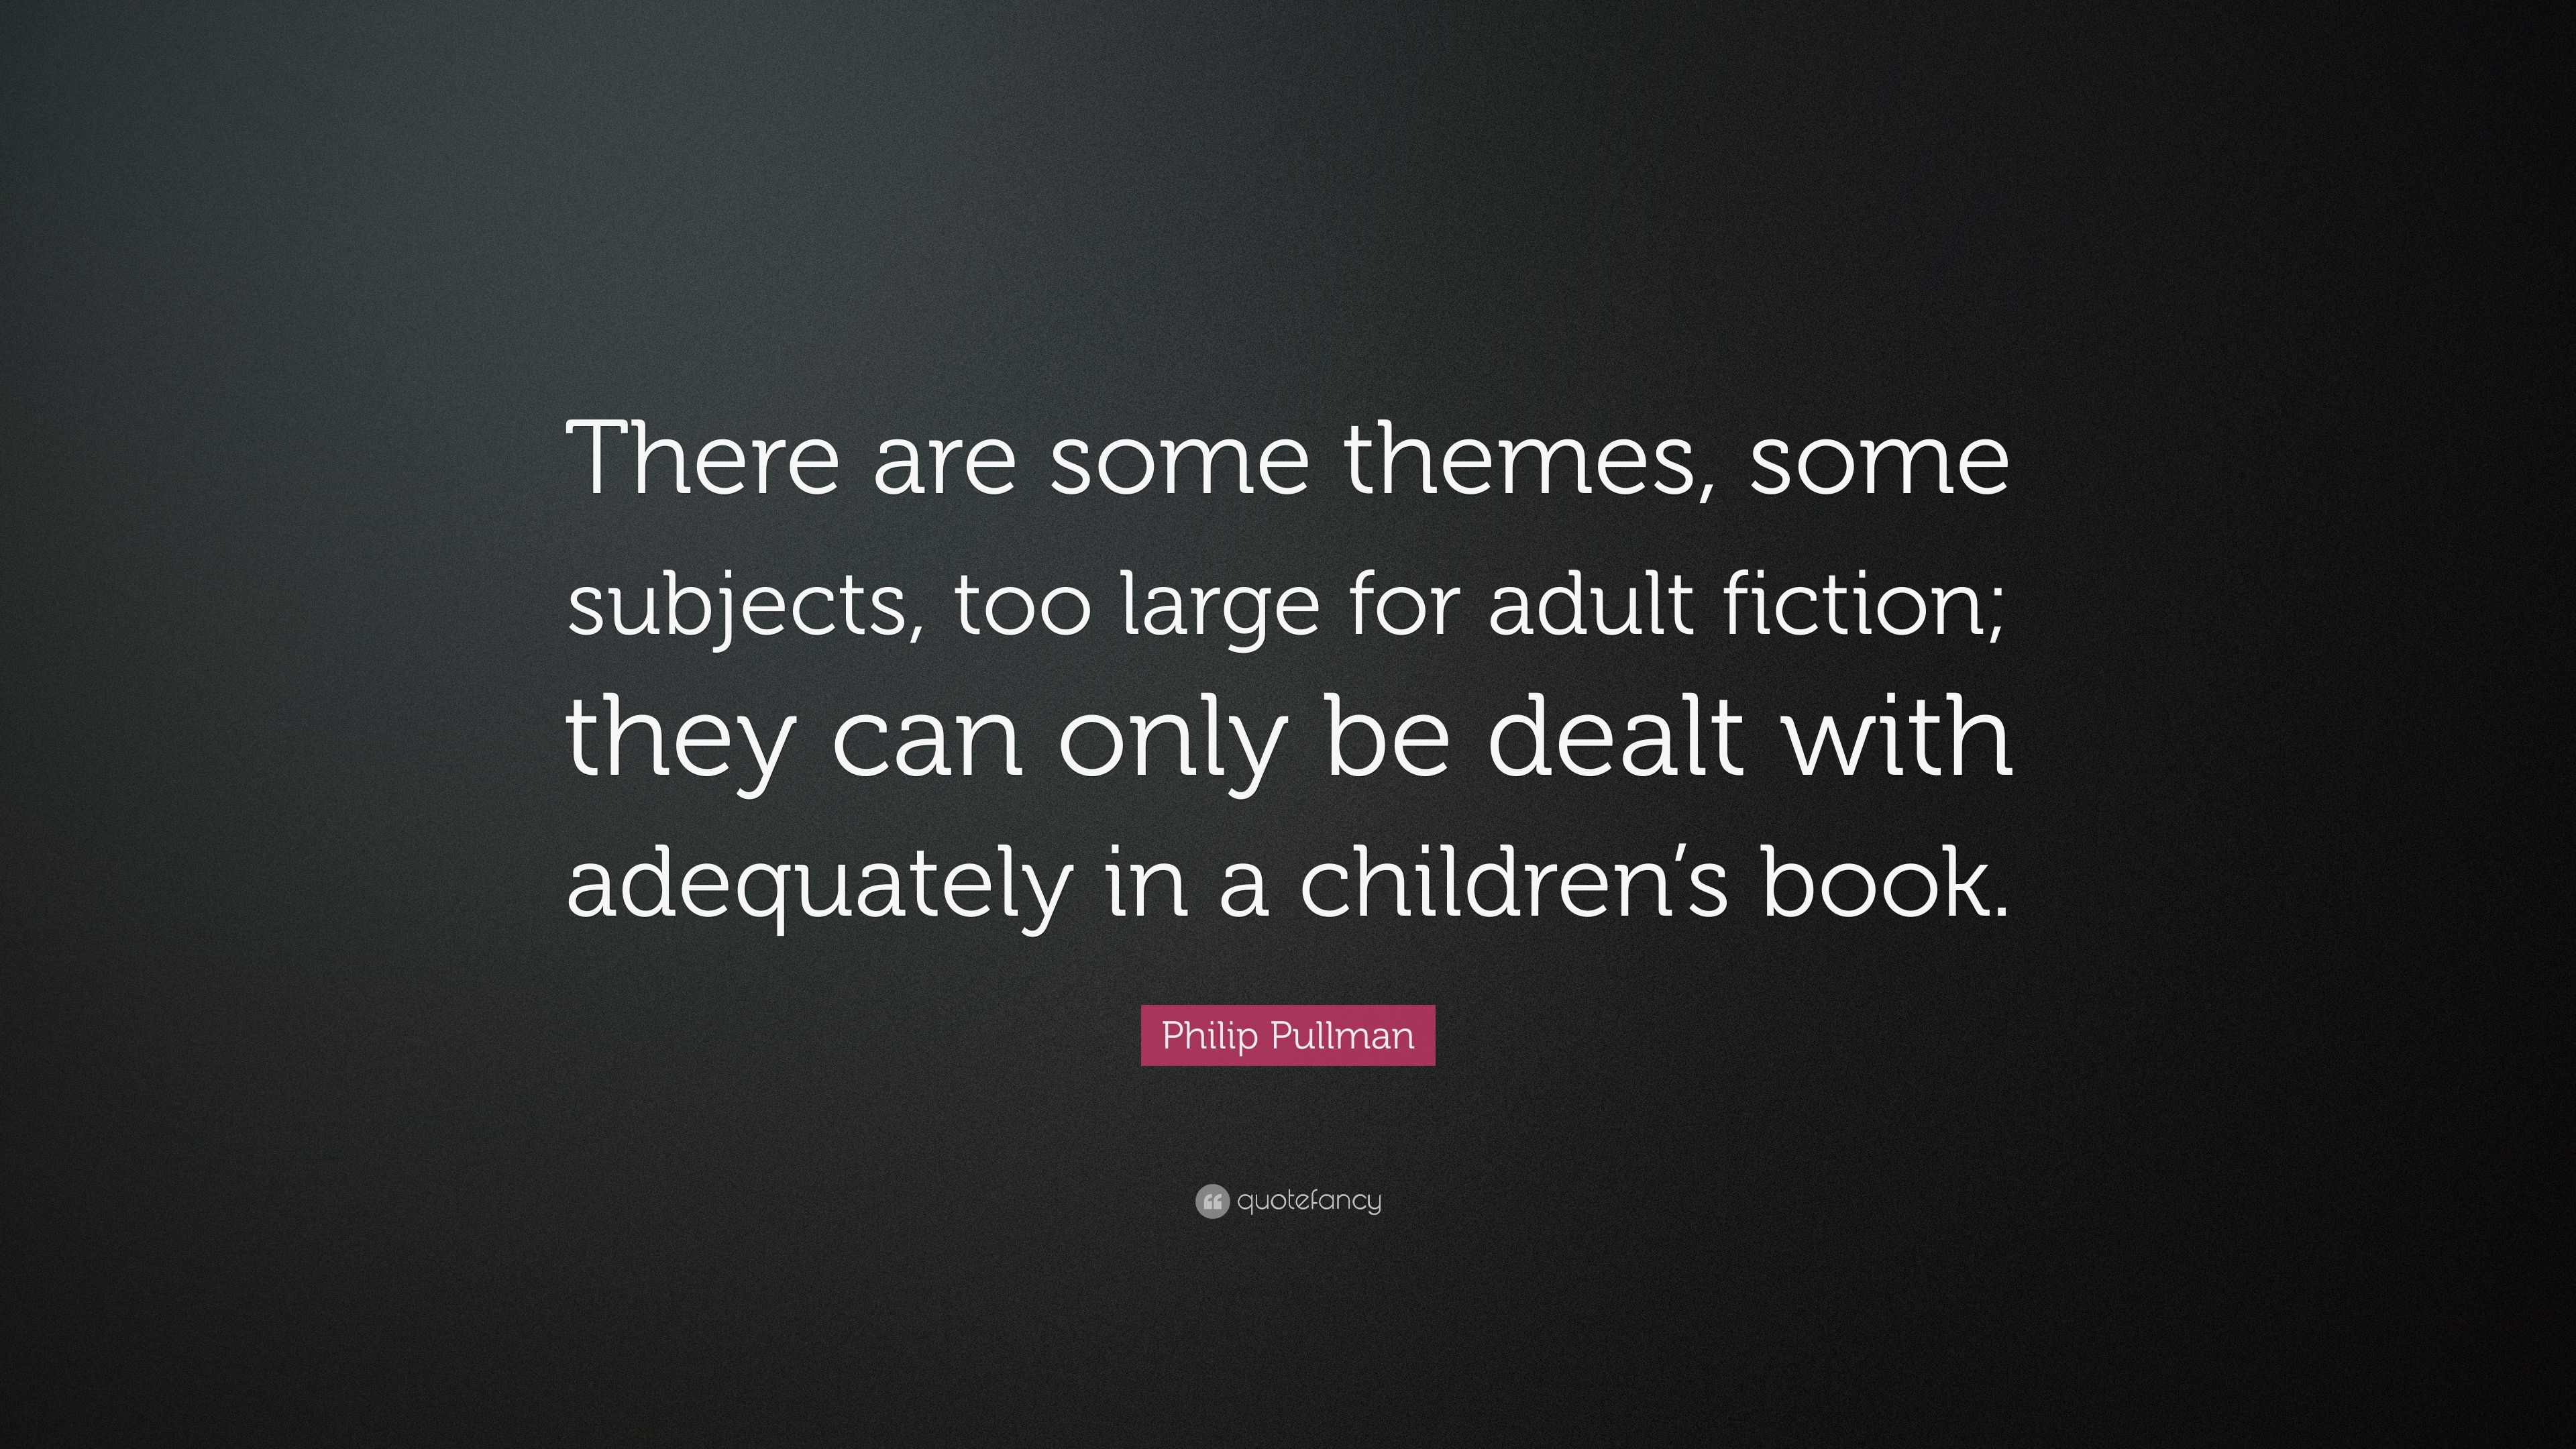 Philip Pullman Quote: “There are some themes, some subjects, too large for adult fiction; they can only be dealt with adequately in a children'.” (11 wallpaper)